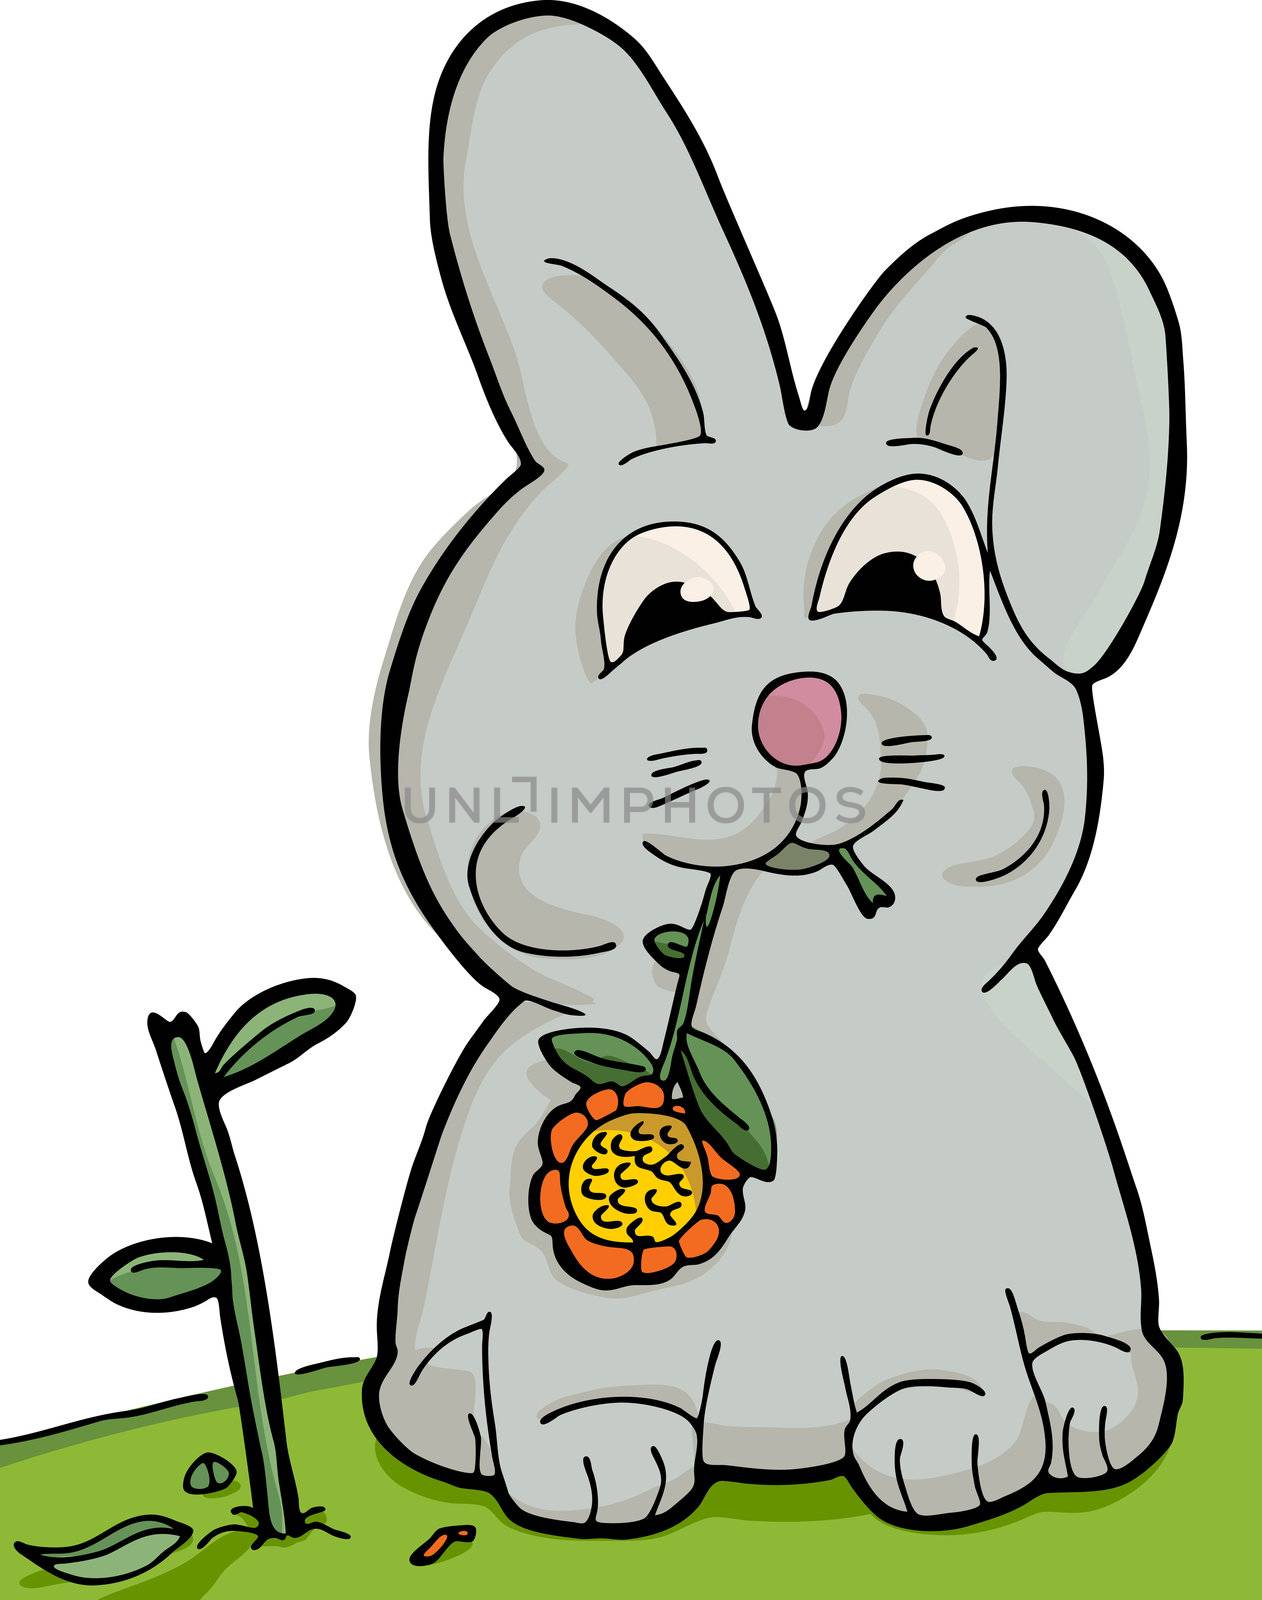 Cute bunny munching on a sunflower with torn stem